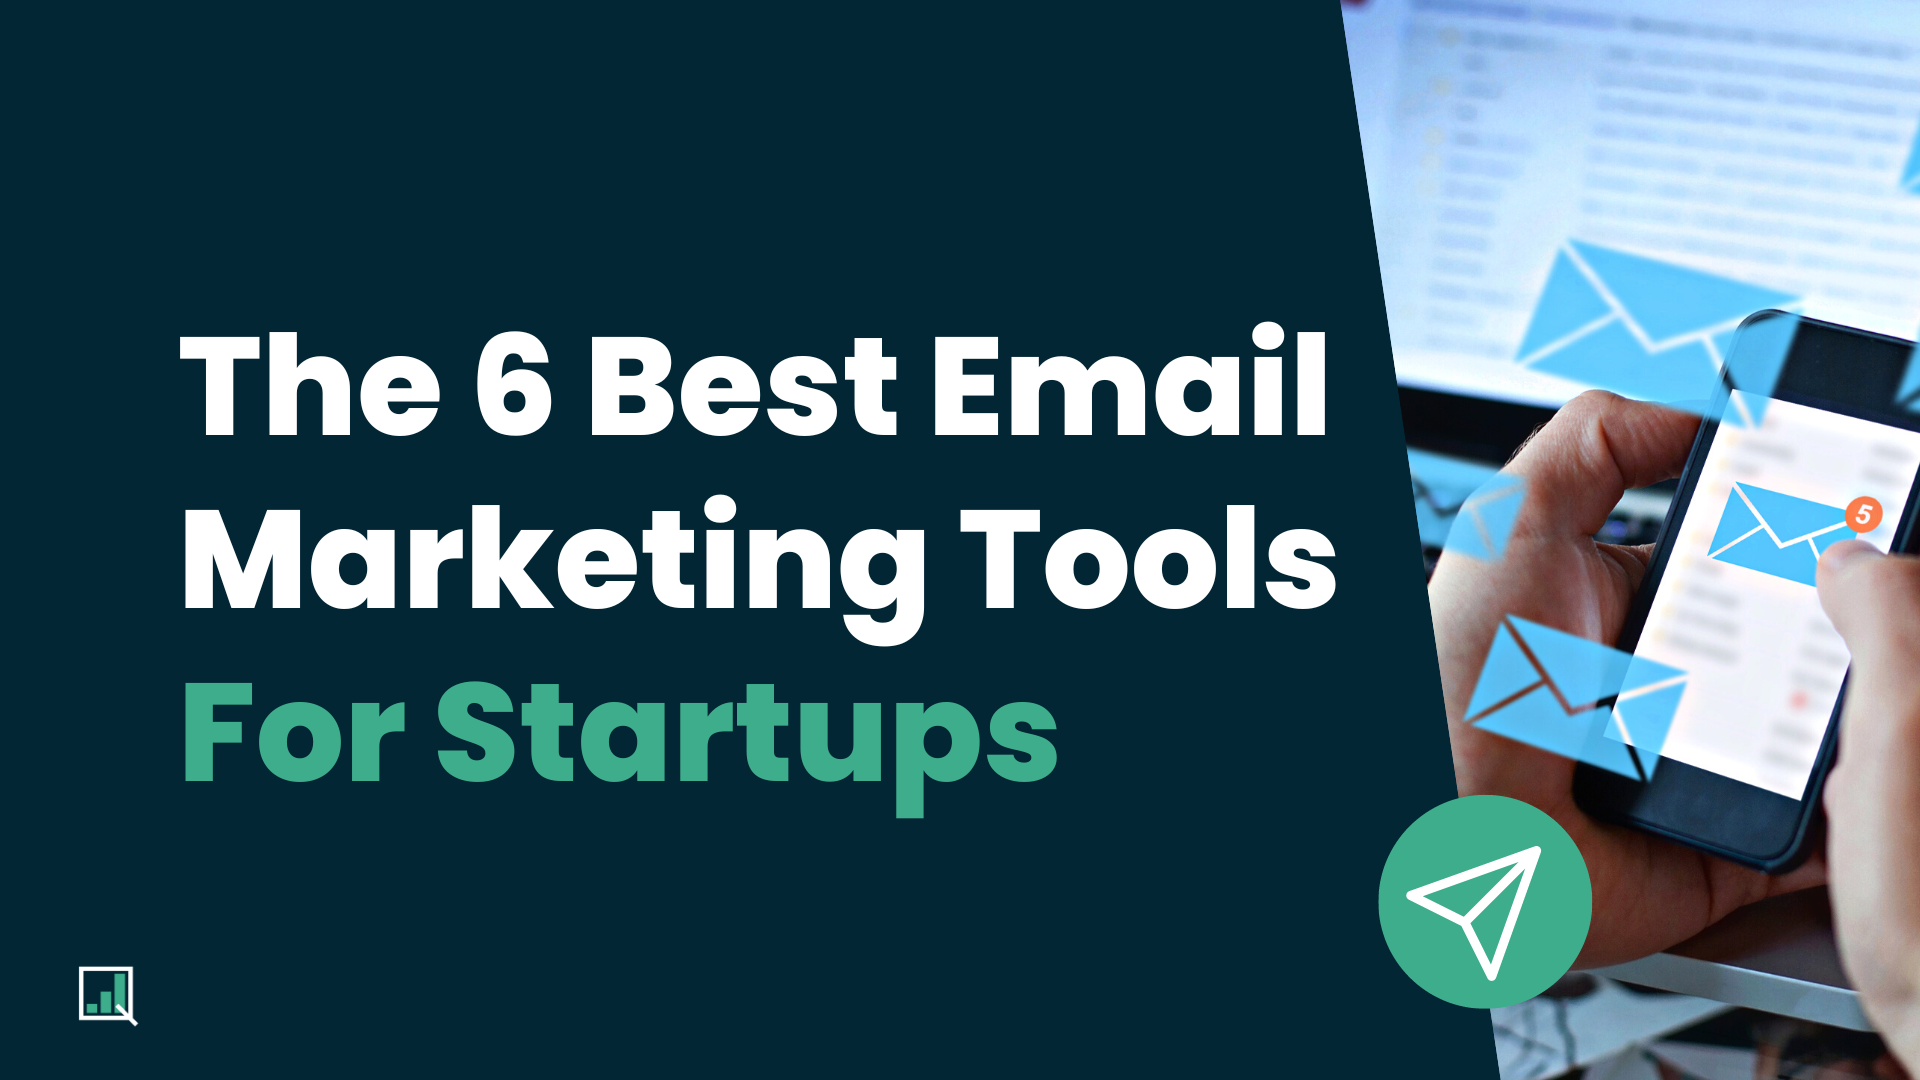 The 6 Best Email Marketing Tools For Startups